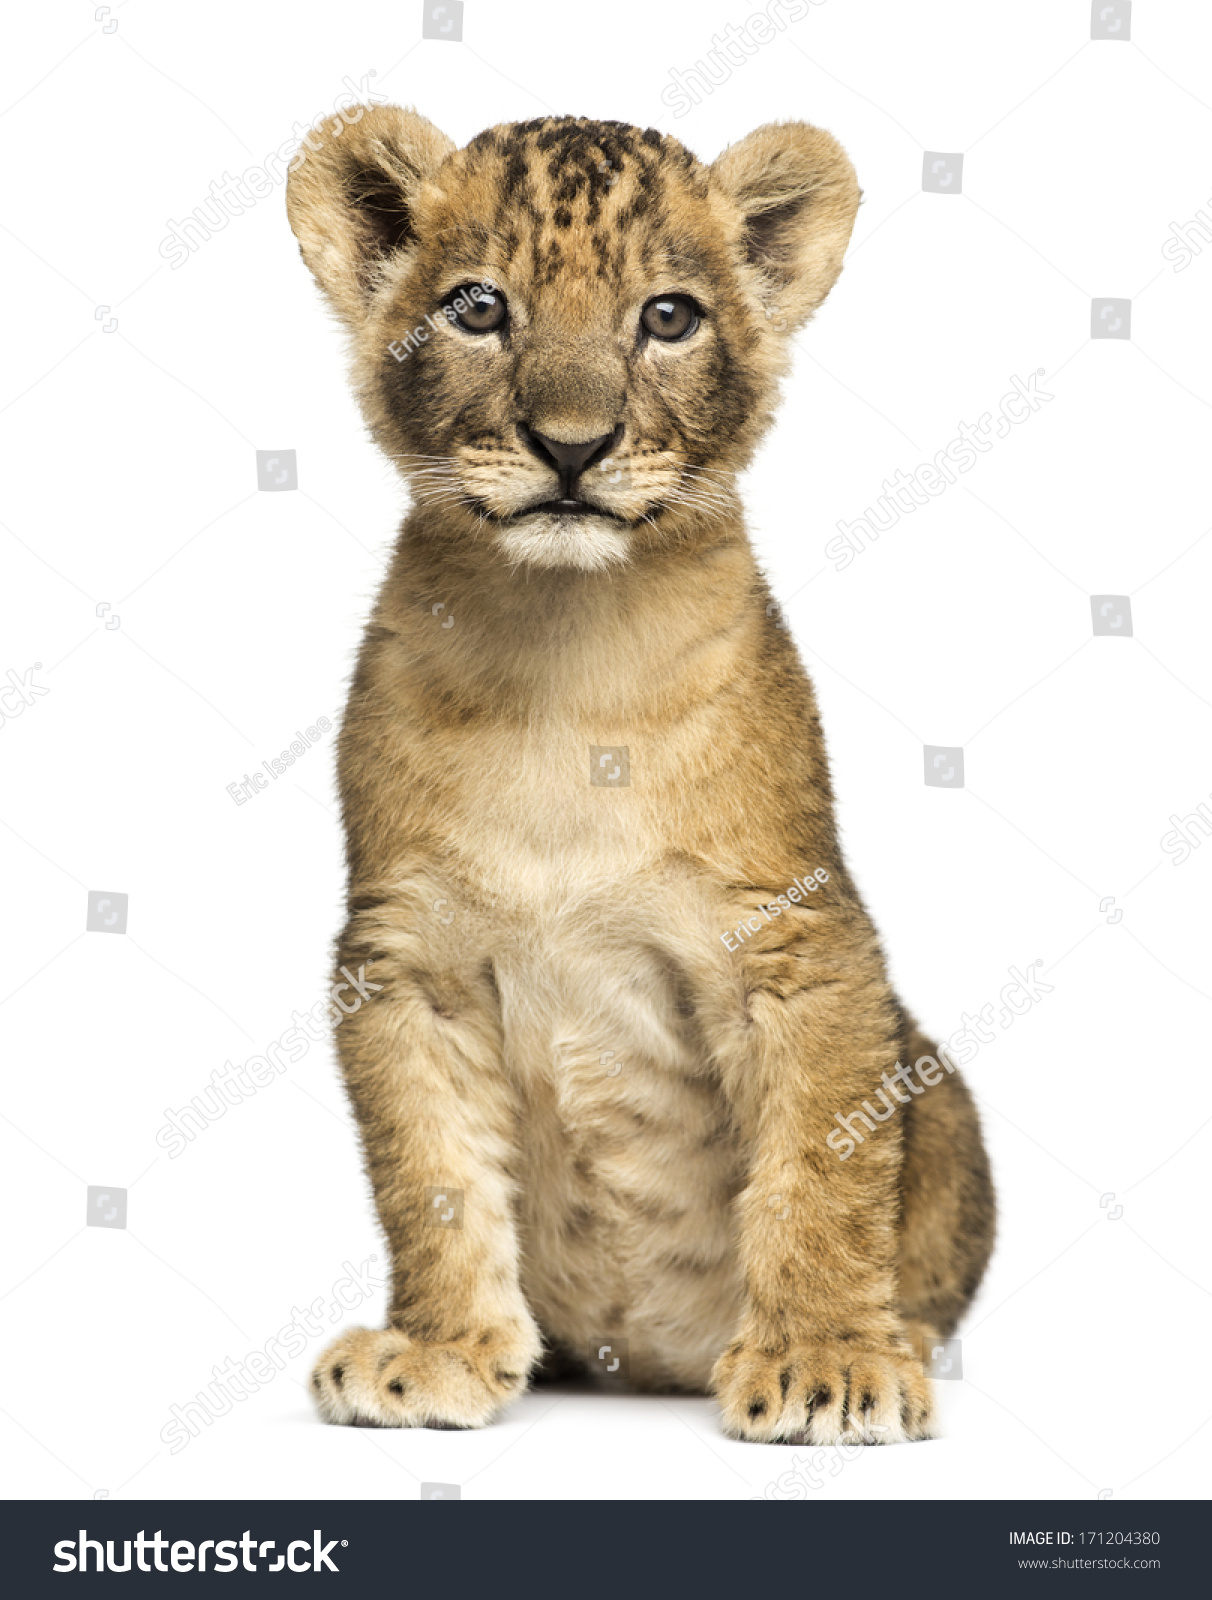 Lion cub sitting, looking at the camera, 7 weeks old, isolated on white #171204380